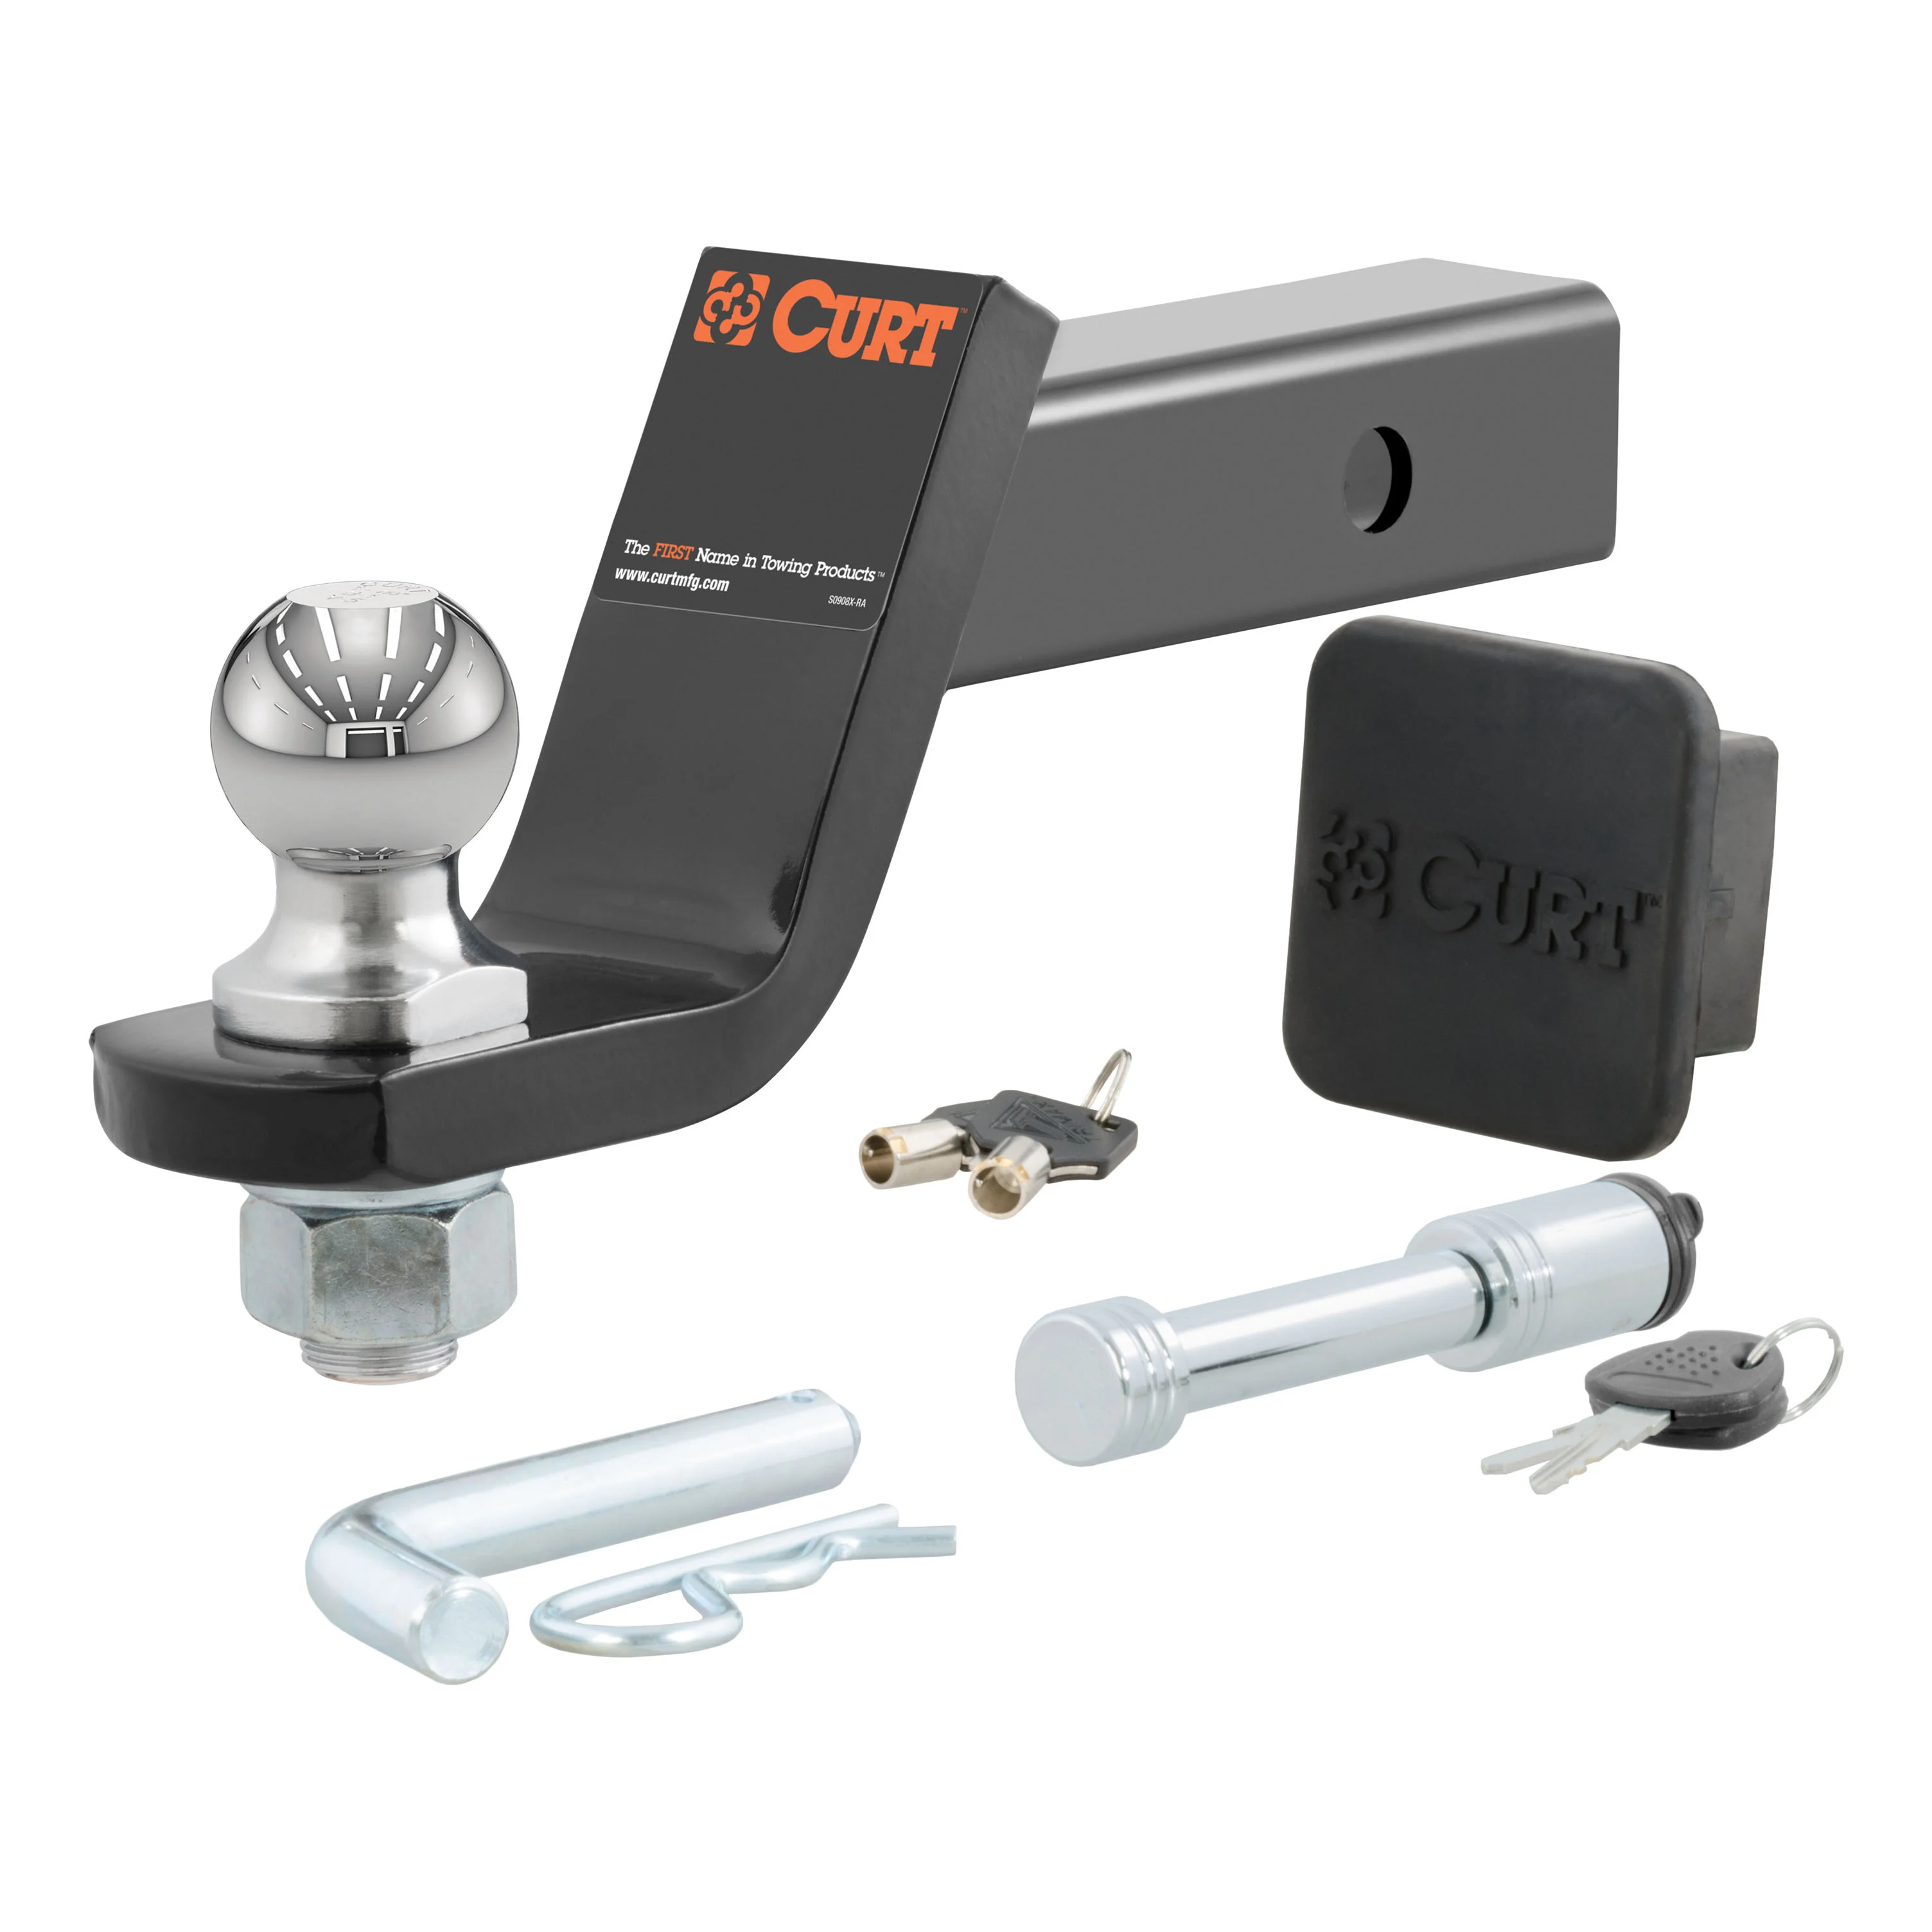 OEM 2020 Chrysler Pacifica Curt Towing Starter Kit 2-inch ball, 2-inch shank with 4-inch drop (Part #68628506AA)